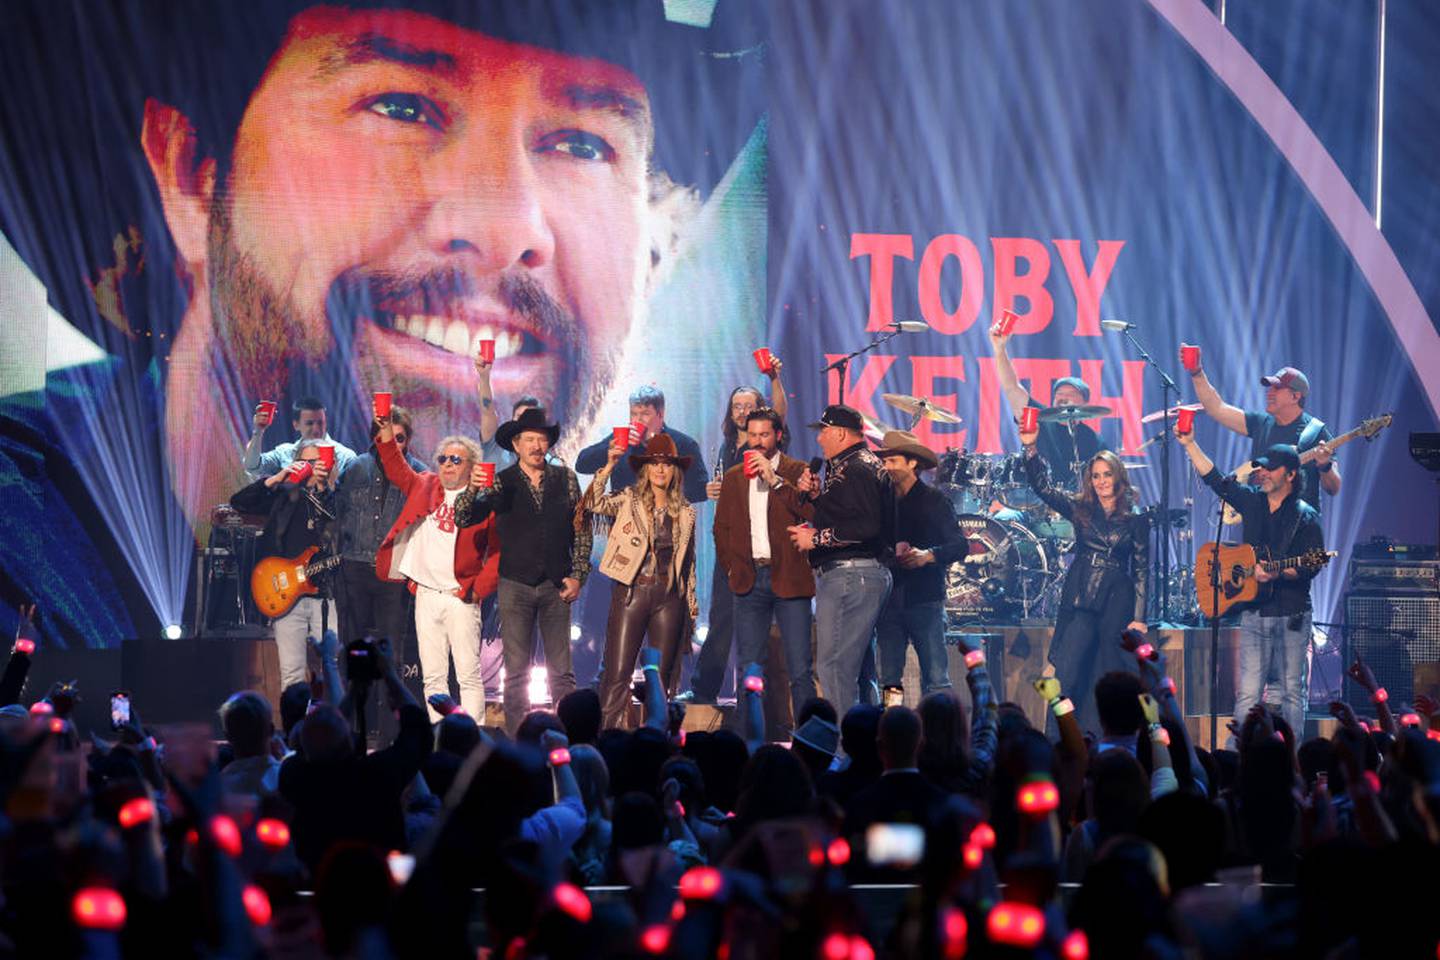 A group of performers hold up red Solo cups to honor Toby Keith.